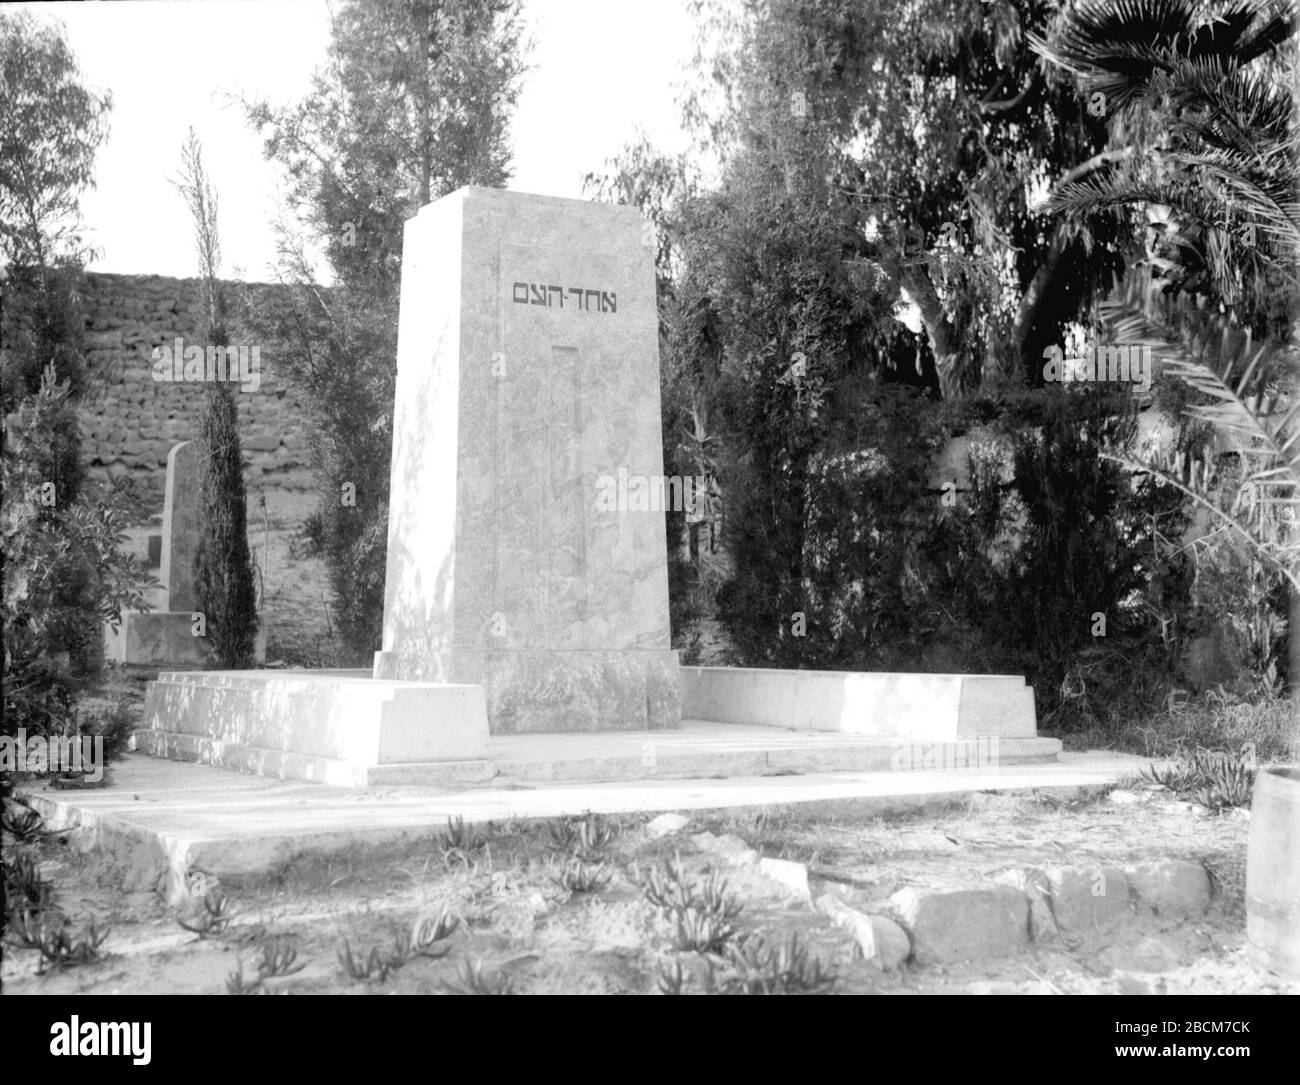 English The Grave Of Ahad Ha Am In Tel Aviv S Old Cemetery Ss E I C U E O I I U E E O I Ss E I I O C U C U U E E O E 30 December 1934 This Is Available From National Photo Collection Of